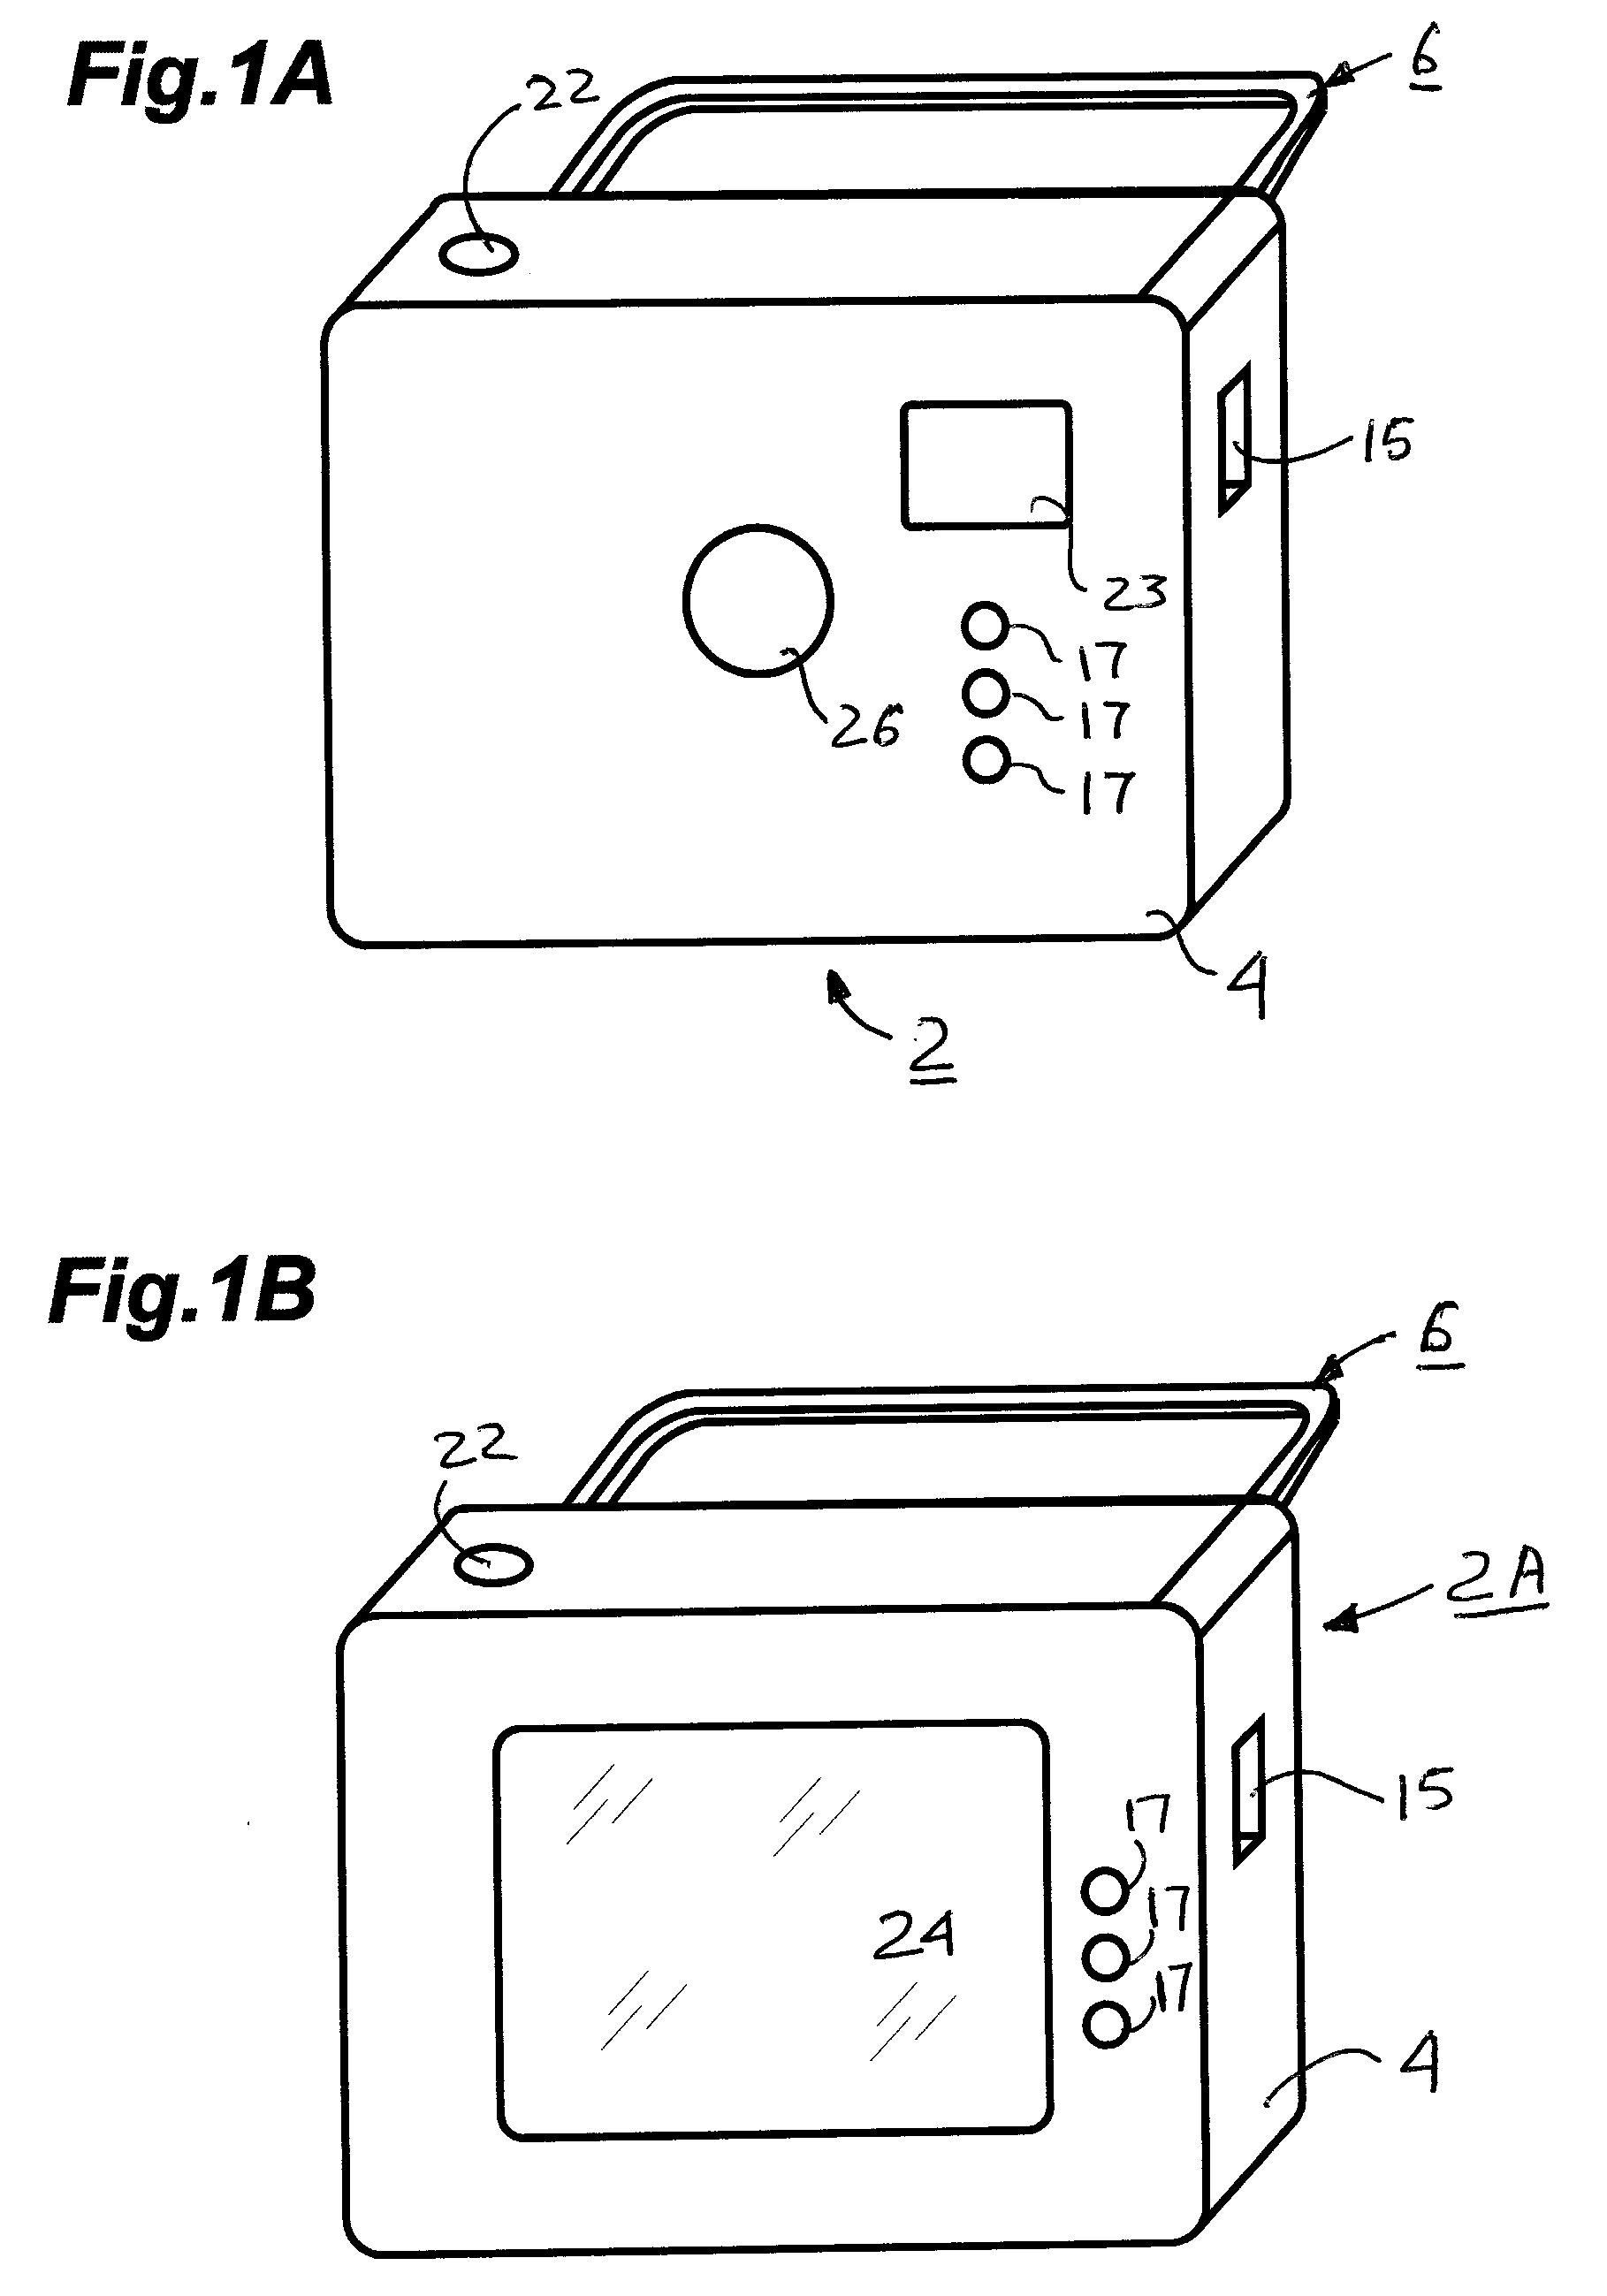 Portable non-contact tonometer and method of determining intra-ocular pressure using such